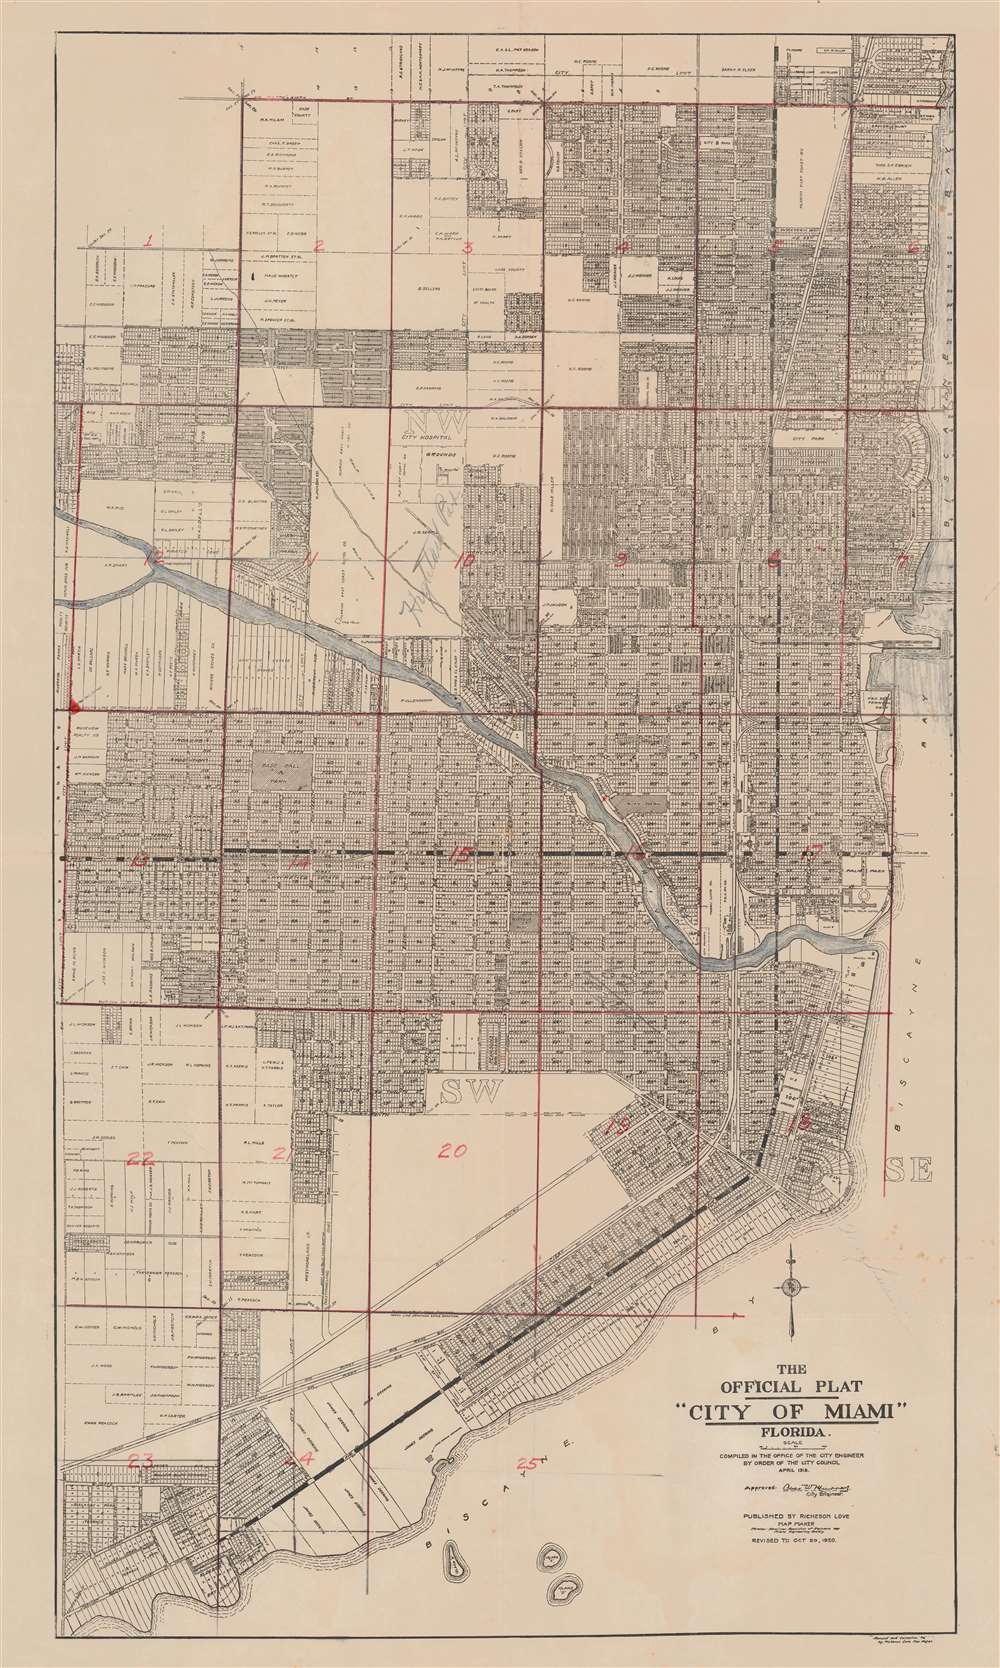 The Official Plat 'City of Miami' Florida. - Main View